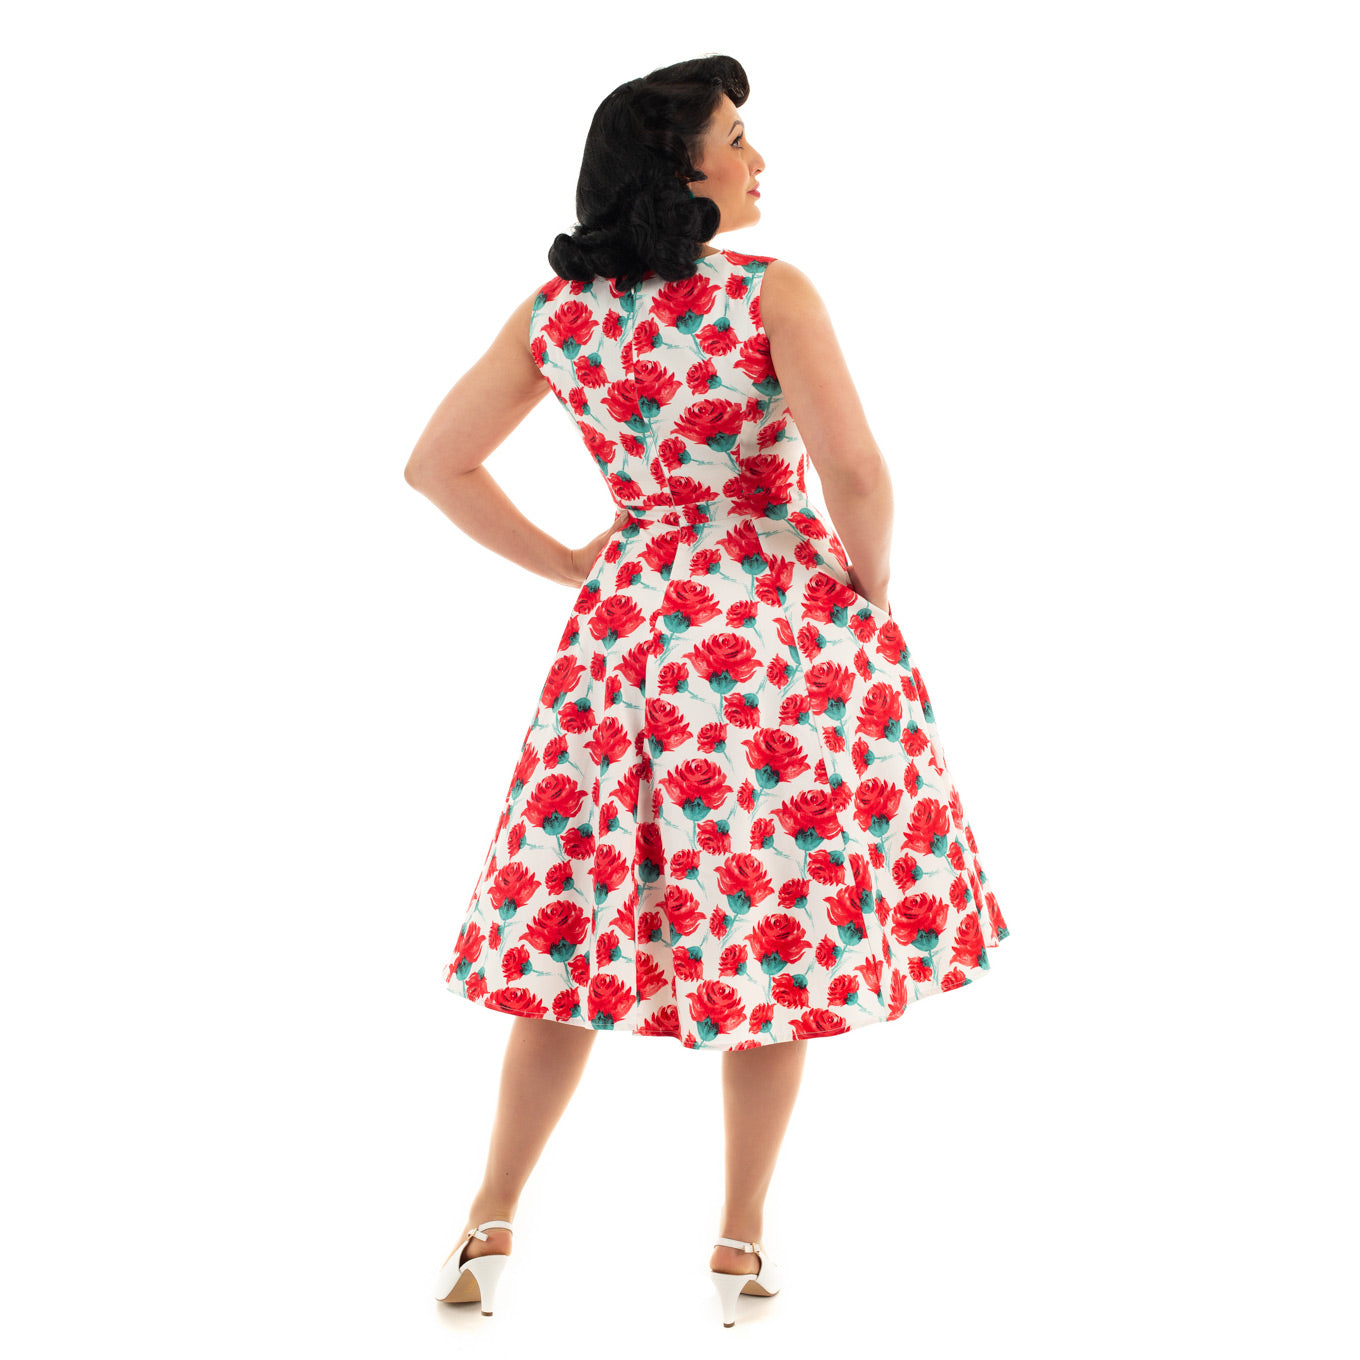 White And Red Rose Vintage V Neck Floral Print Swing Dress - Pretty Kitty Fashion